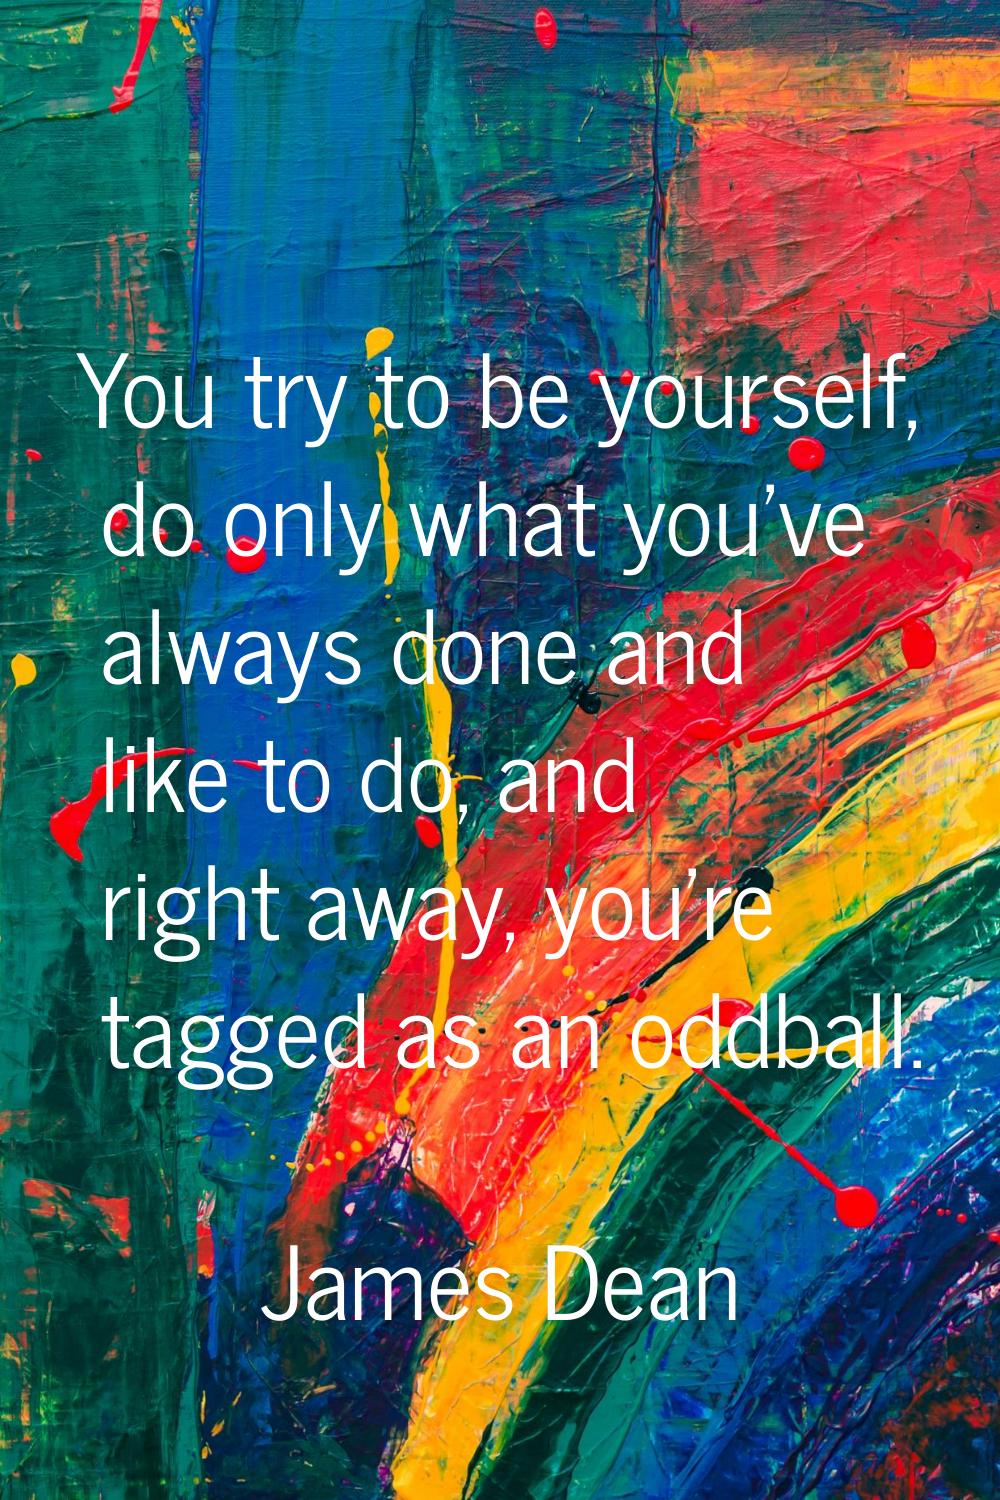 You try to be yourself, do only what you've always done and like to do, and right away, you're tagg